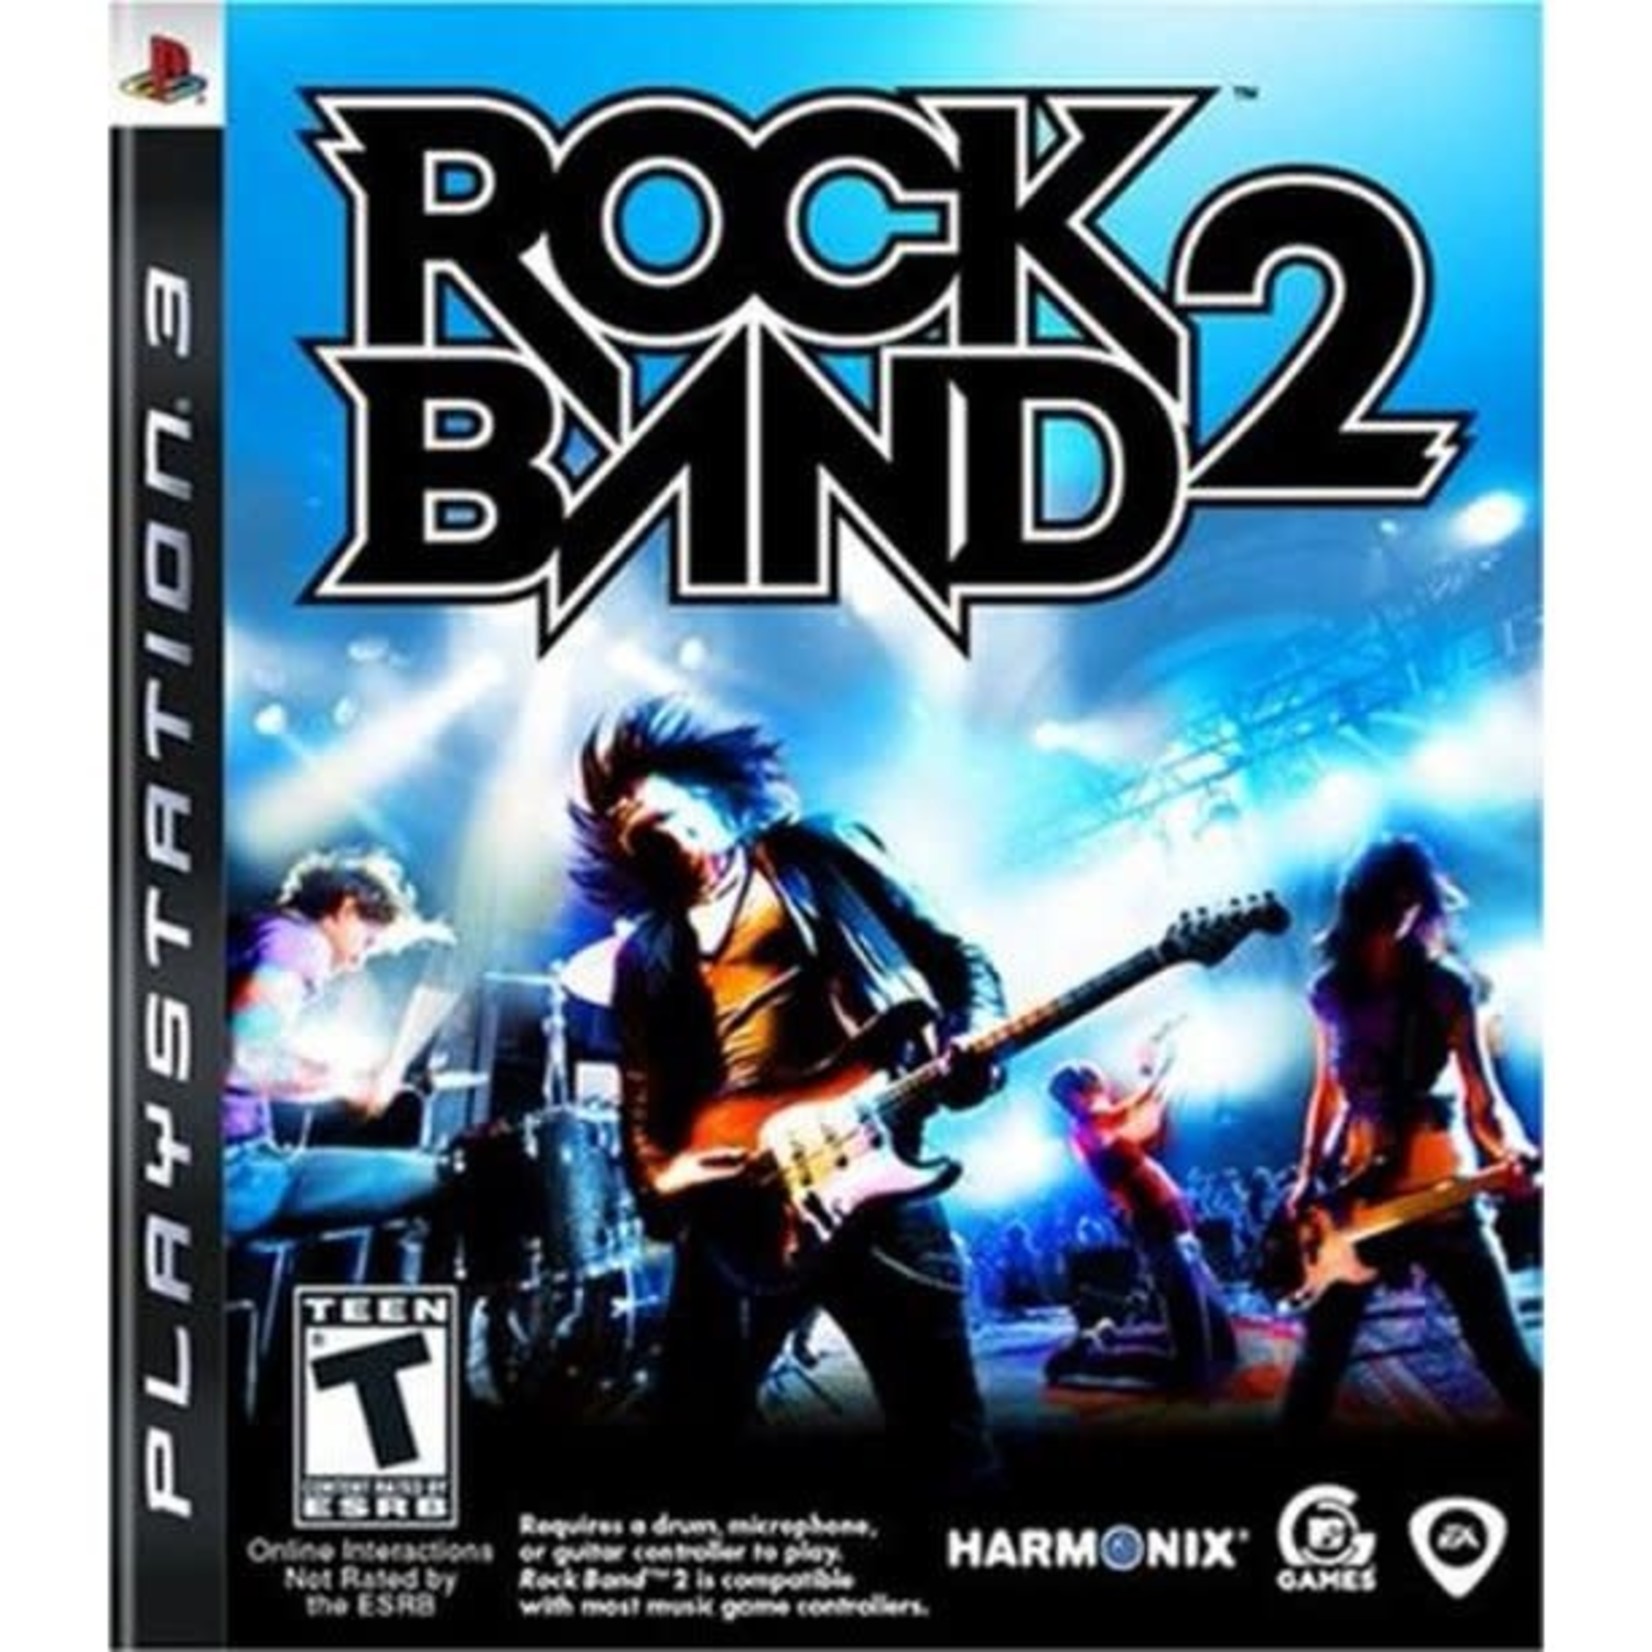 PS3U-ROCK BAND 2 - GAME ONLY